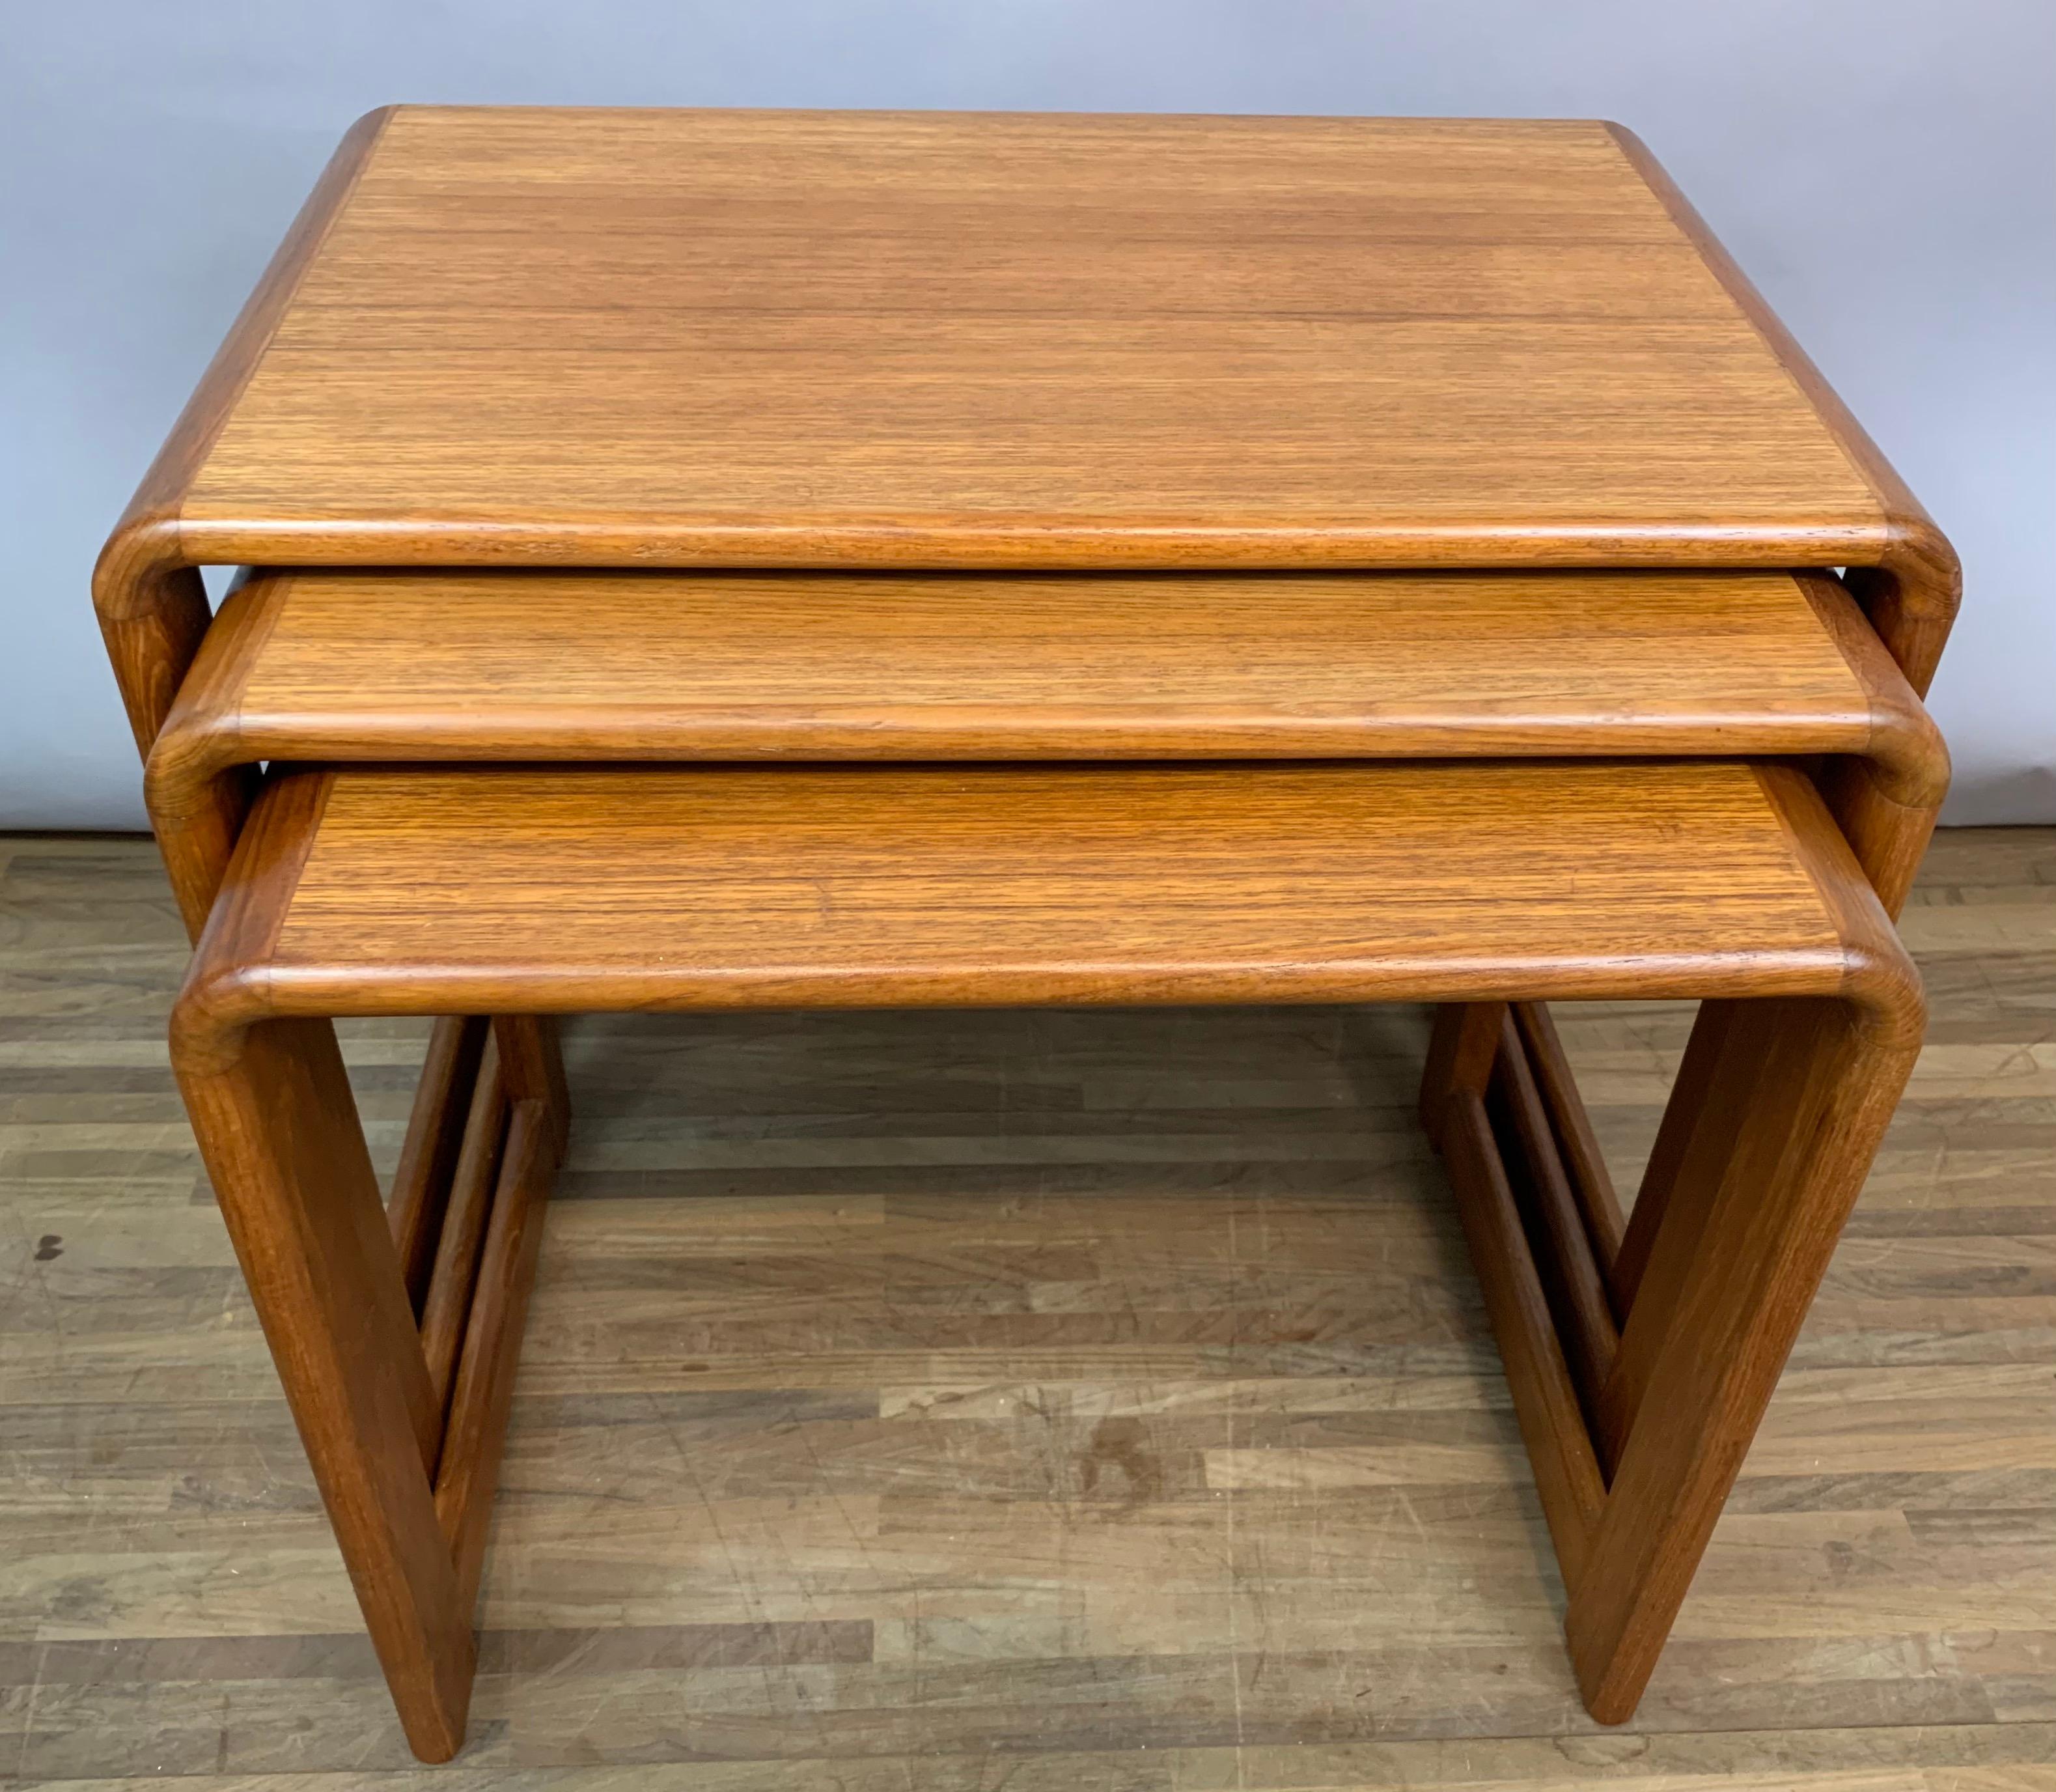 Set of 3, 1960s, nest of teak tables. Made in England. Very well-made, sturdy and fully functional with rounded edges, rectangular sides and lengthways back supports. The tables have been fully restored but there are some areas of slight